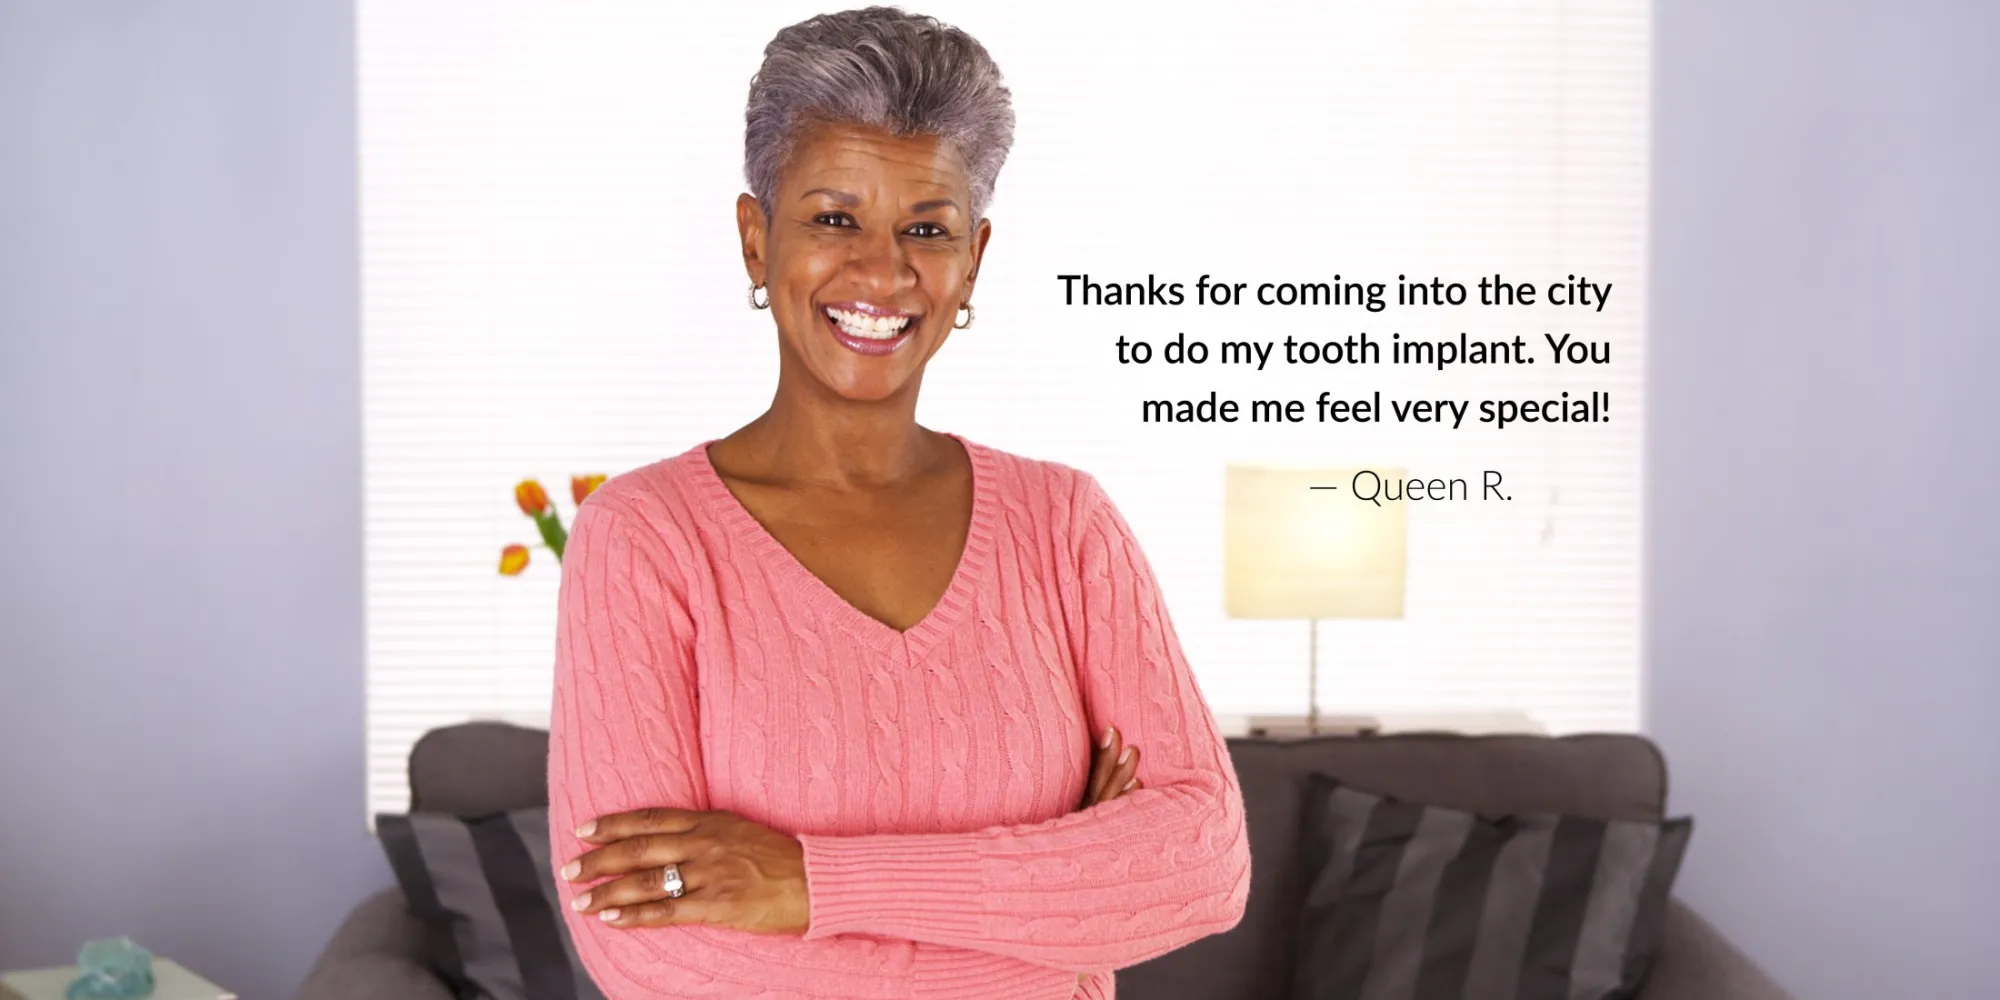 woman smiling with text of patient testimonial